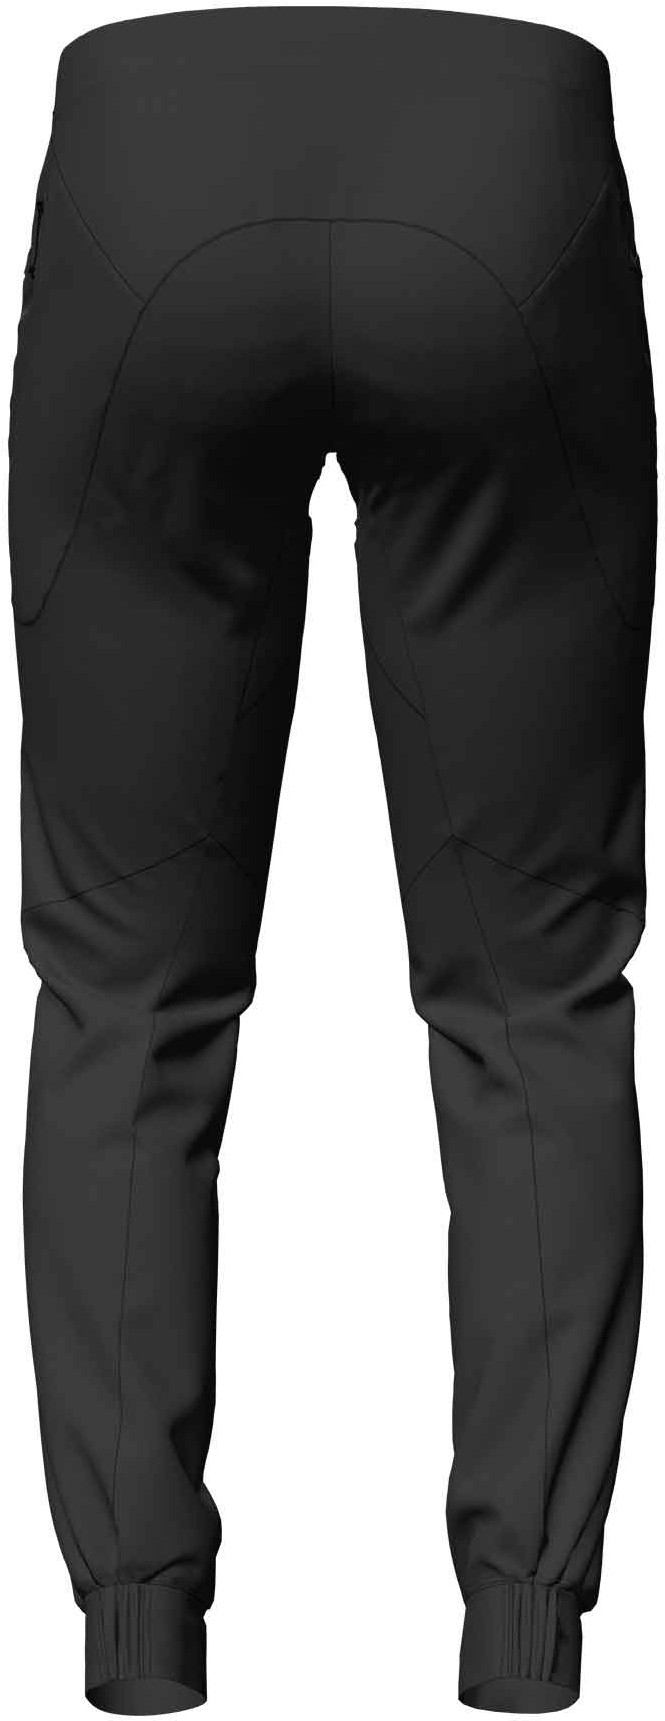 Glidepath Trousers image 2